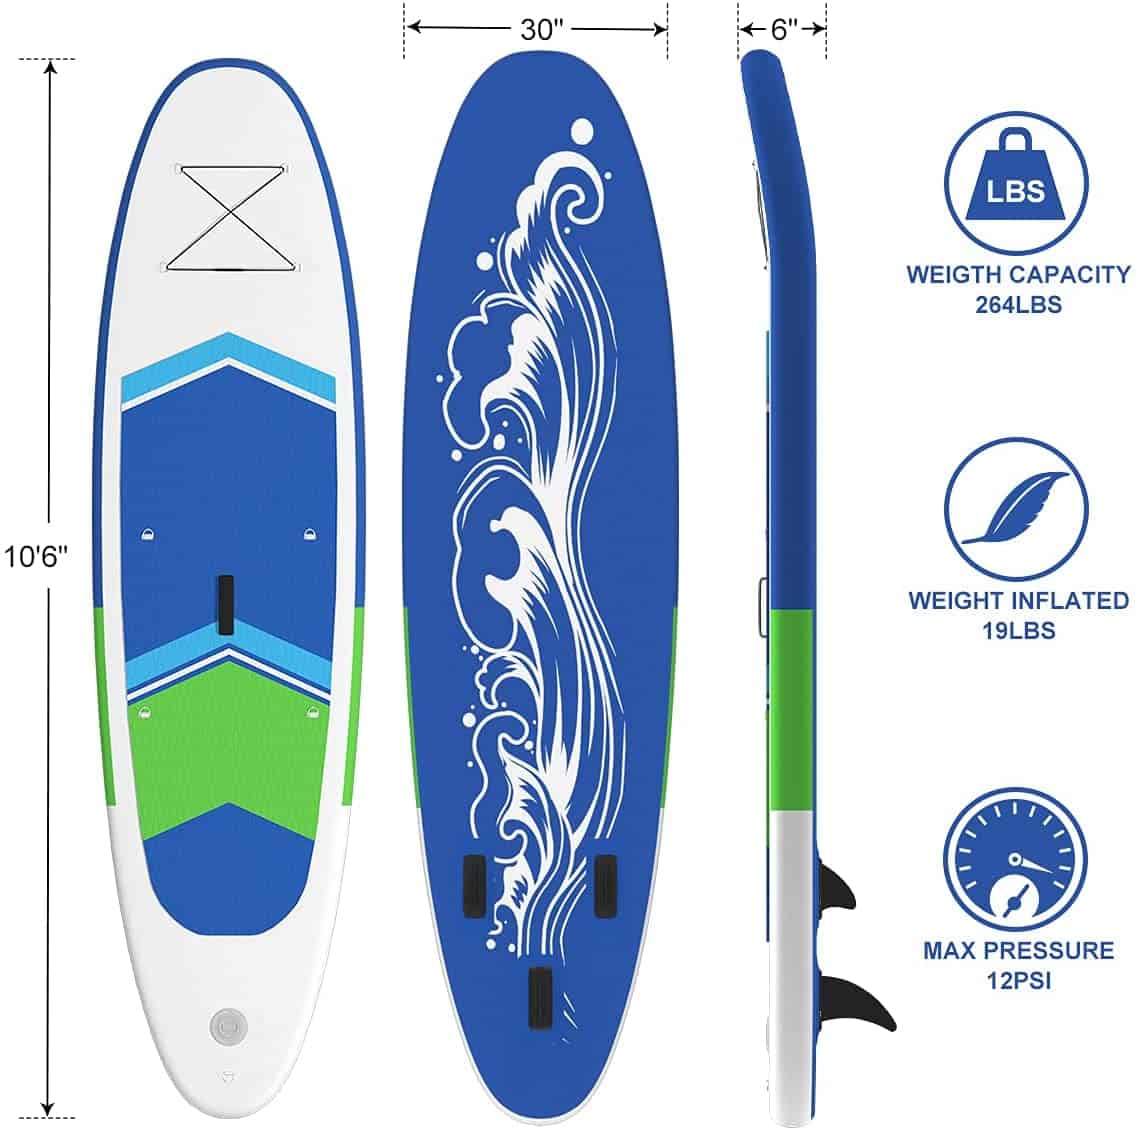 memoffice_inflatable_stand_up_paddle_board_memoffice_106_inflat-1-4